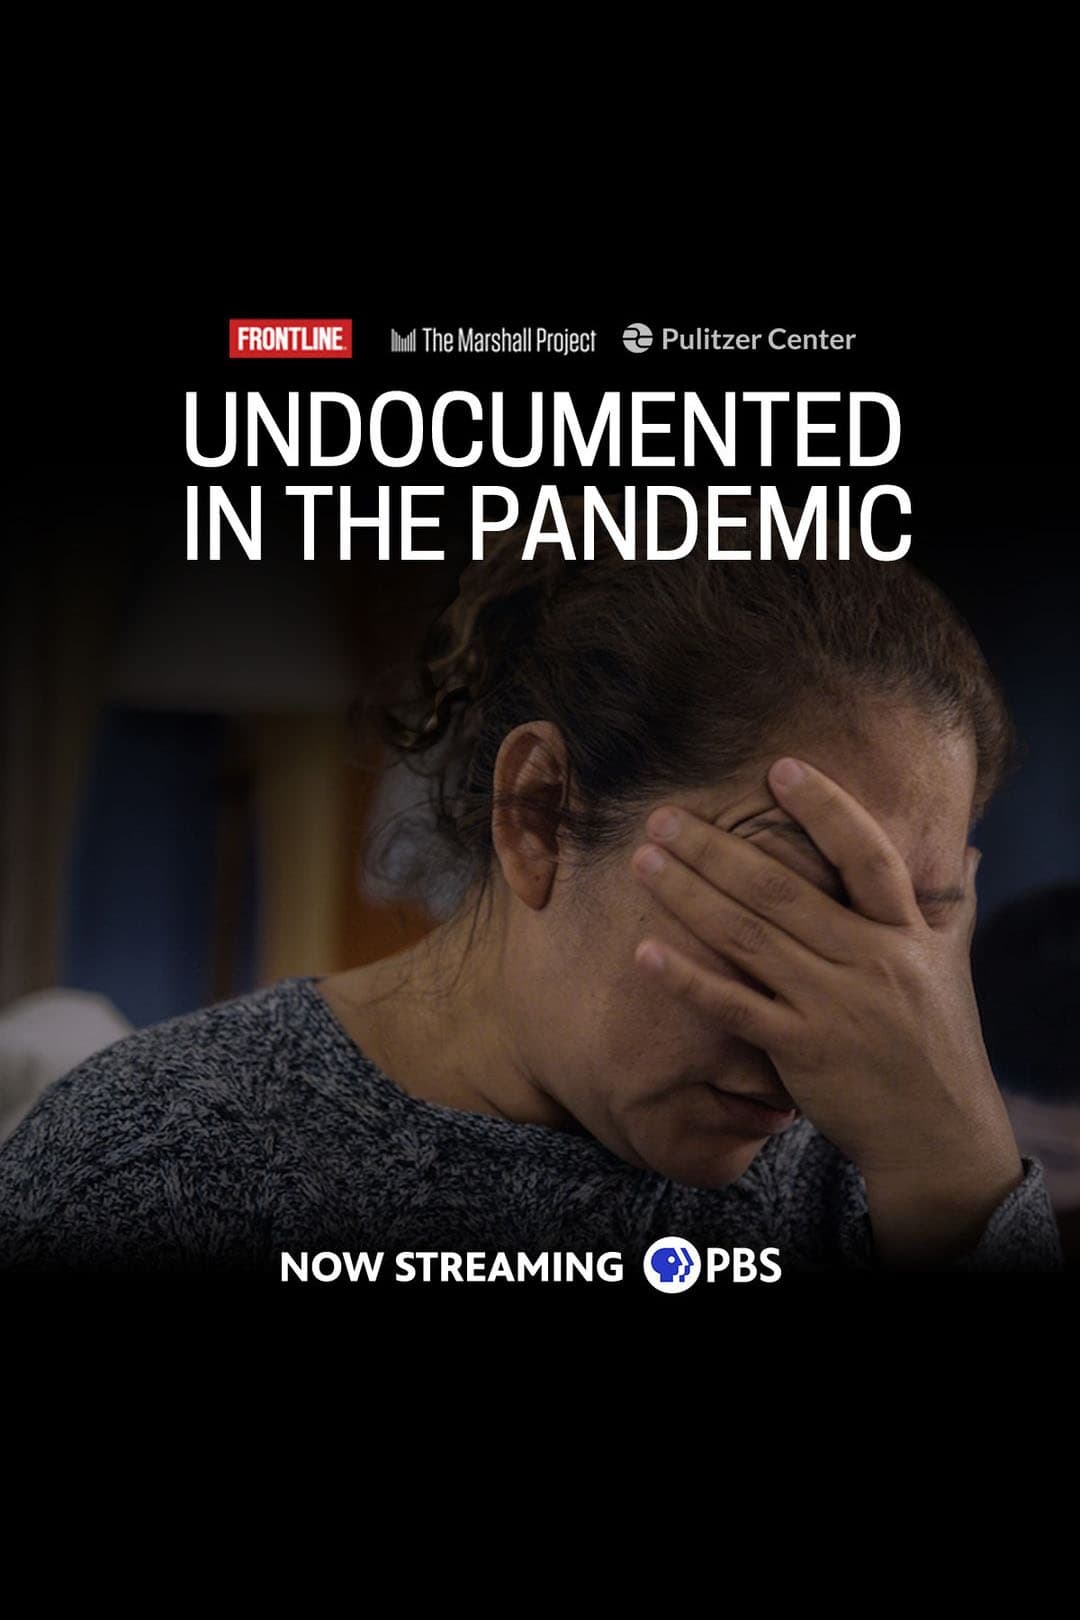 Undocumented in the Pandemic